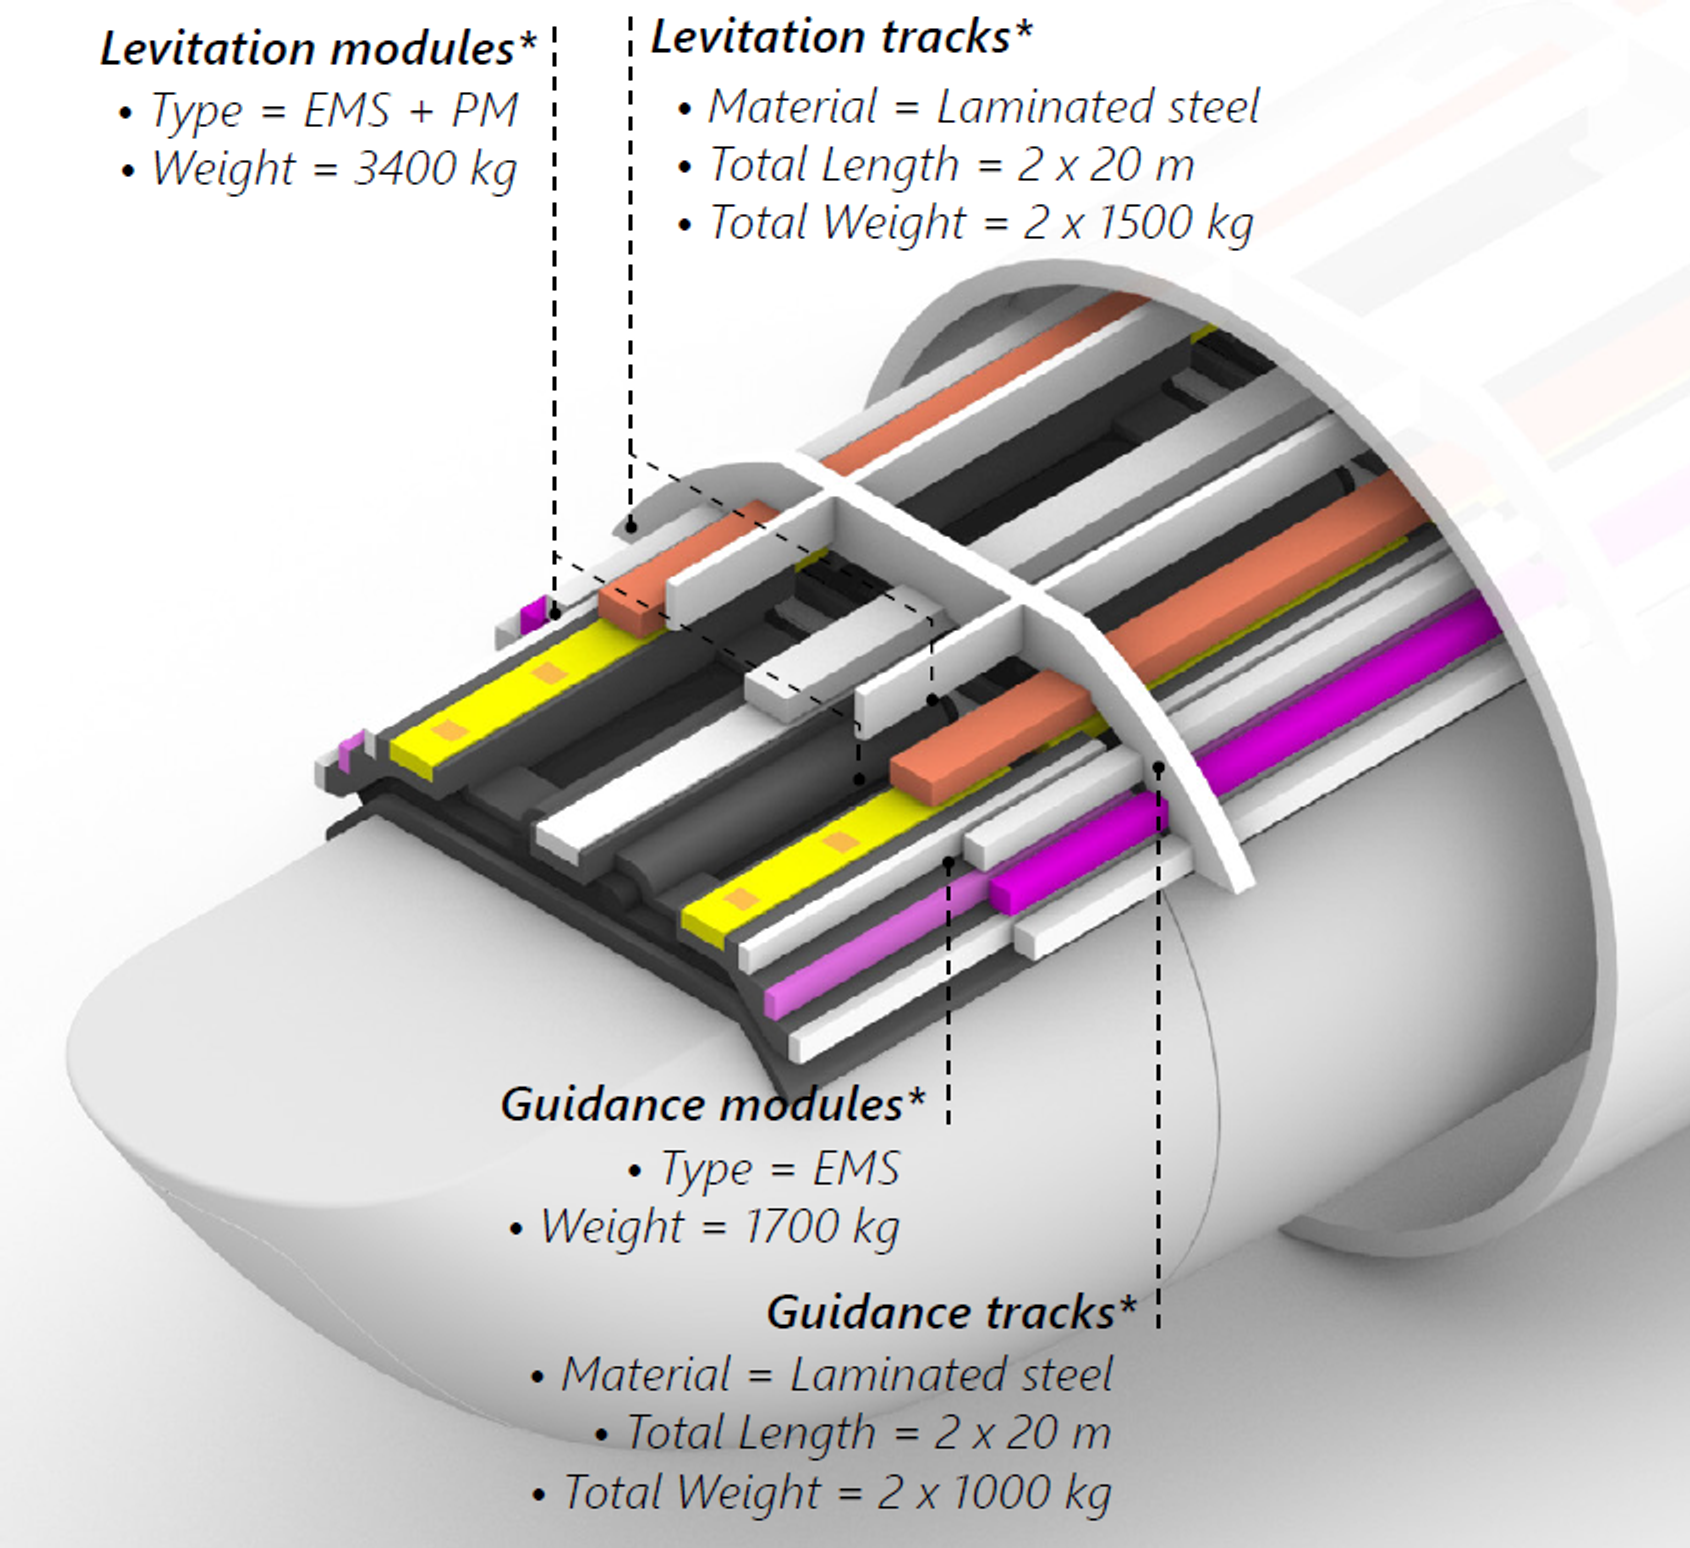 Figure 3: A conceptual model visualizing the levitation guidance system.
*The values presented are indicative for a specific reference design.